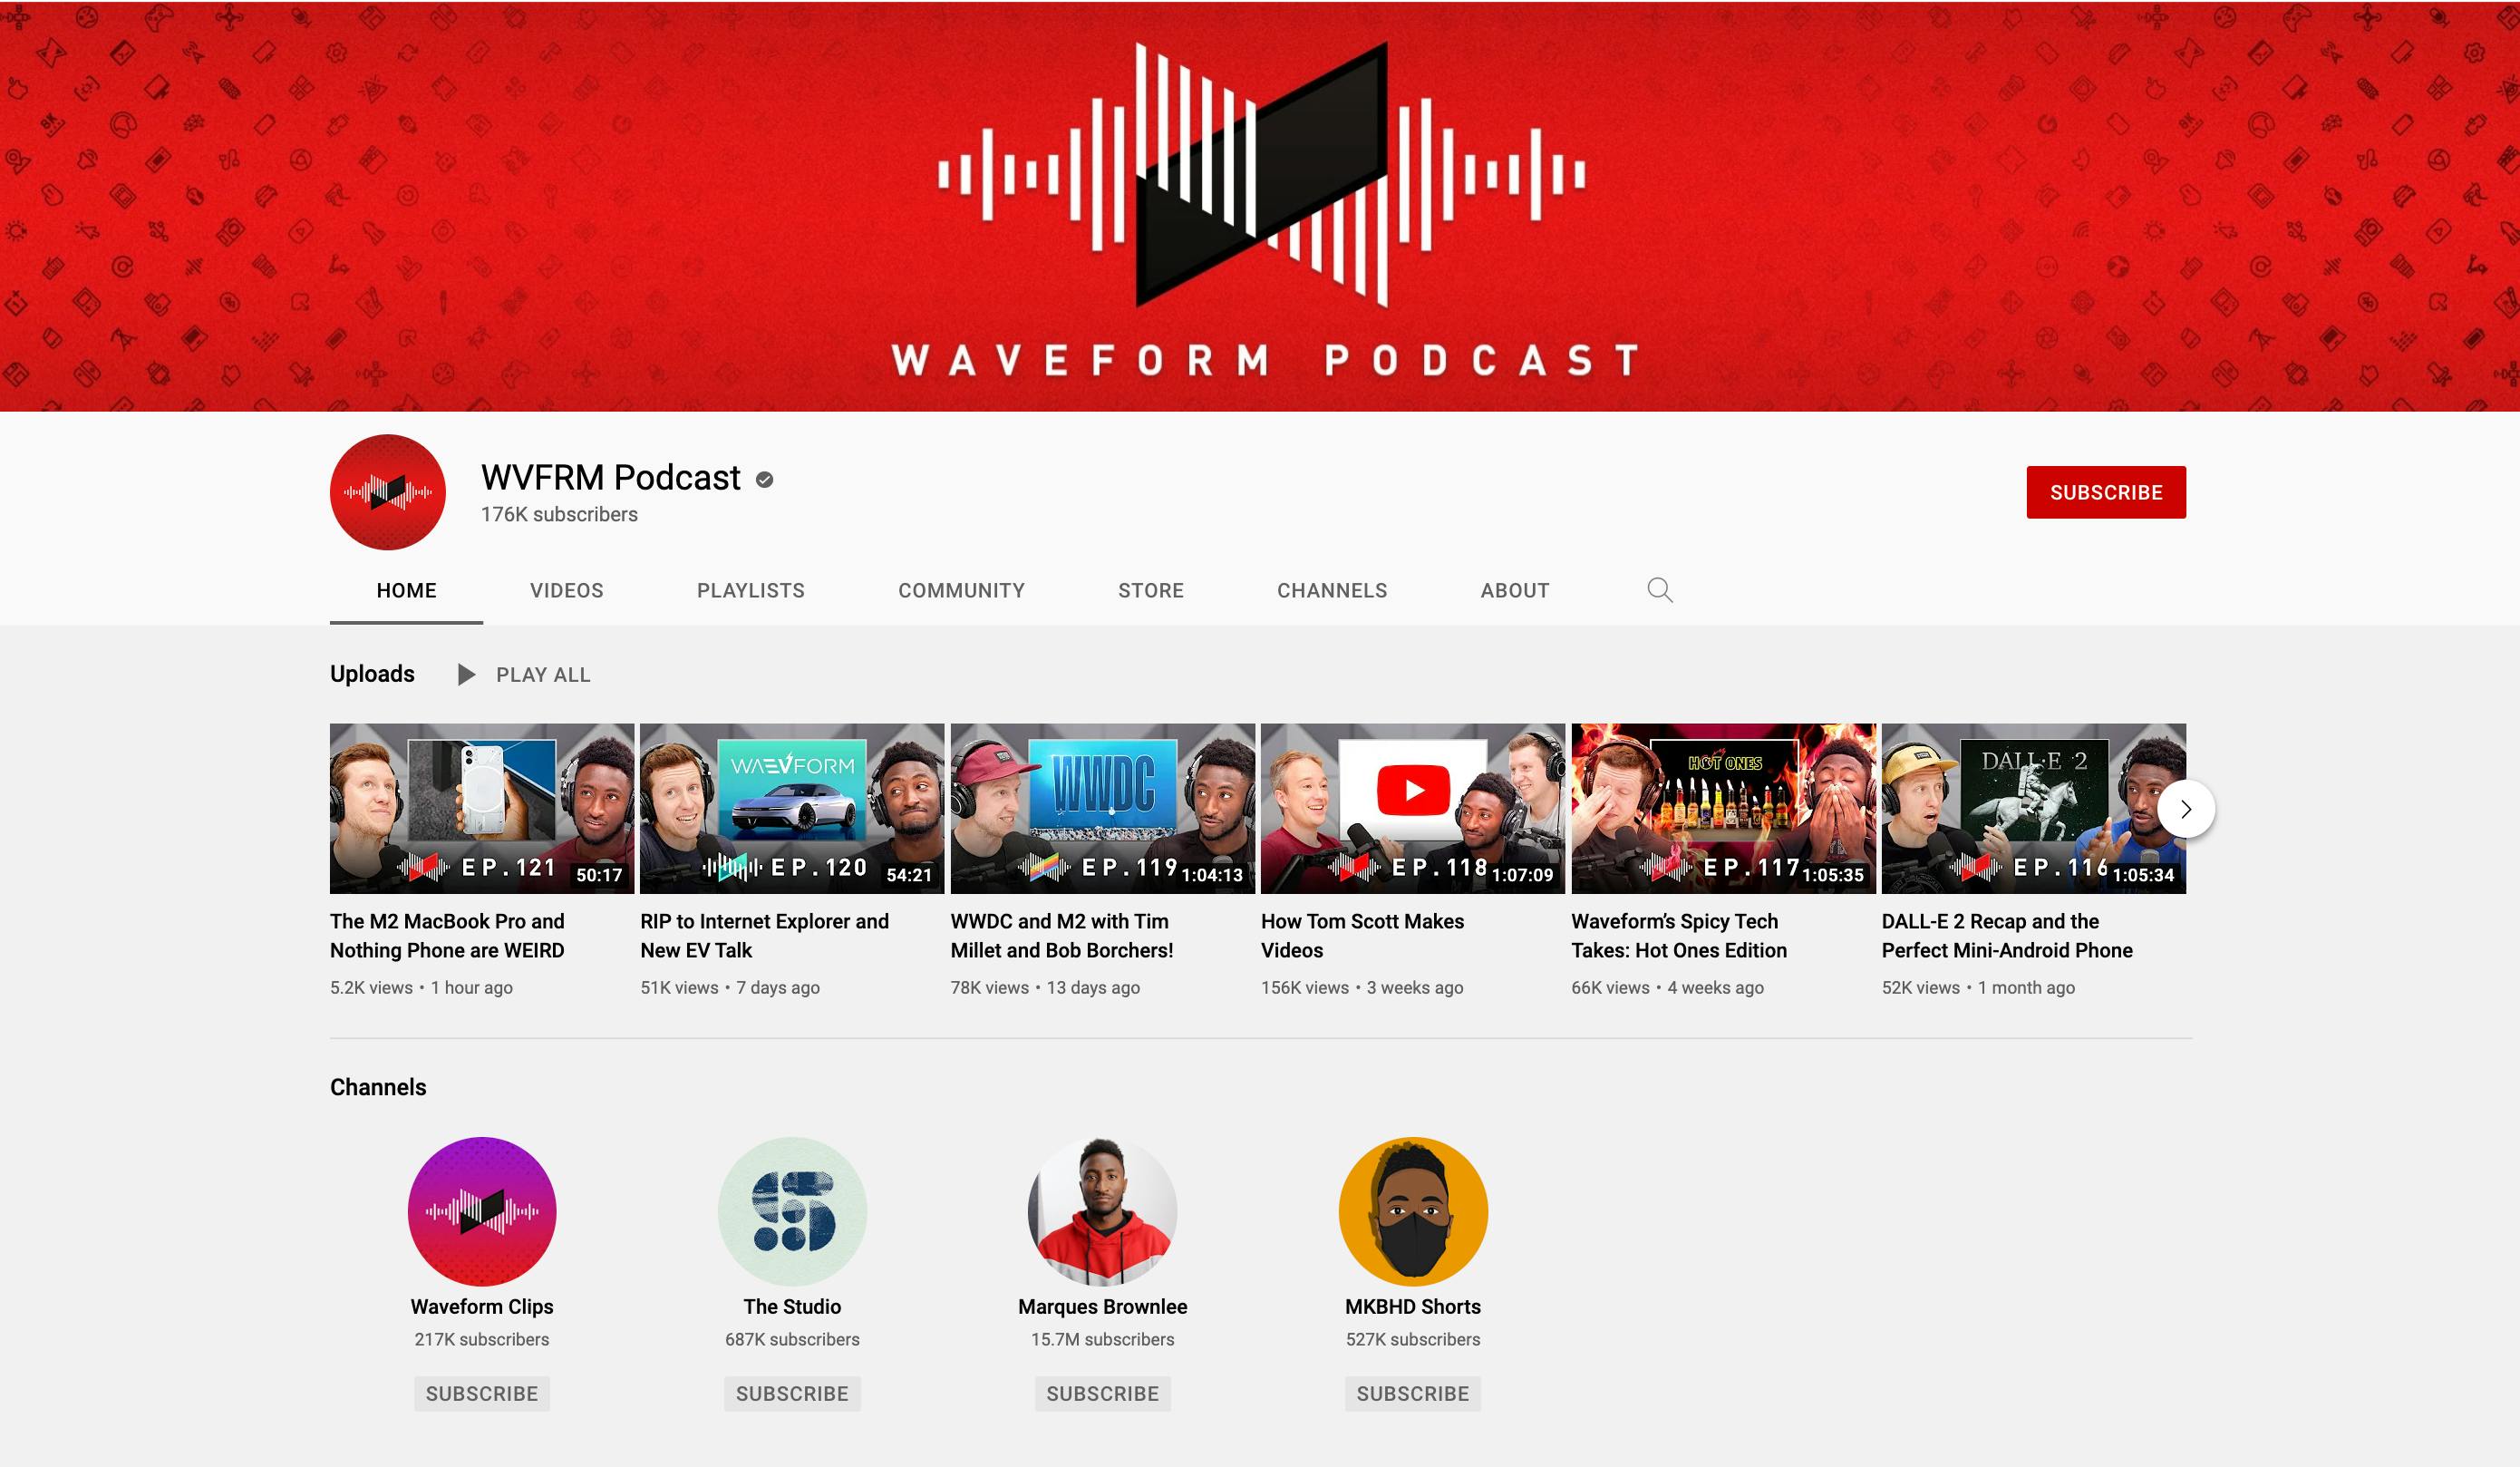 WVFRM Podcast YouTube channel homepage with red banner and video thumbnails